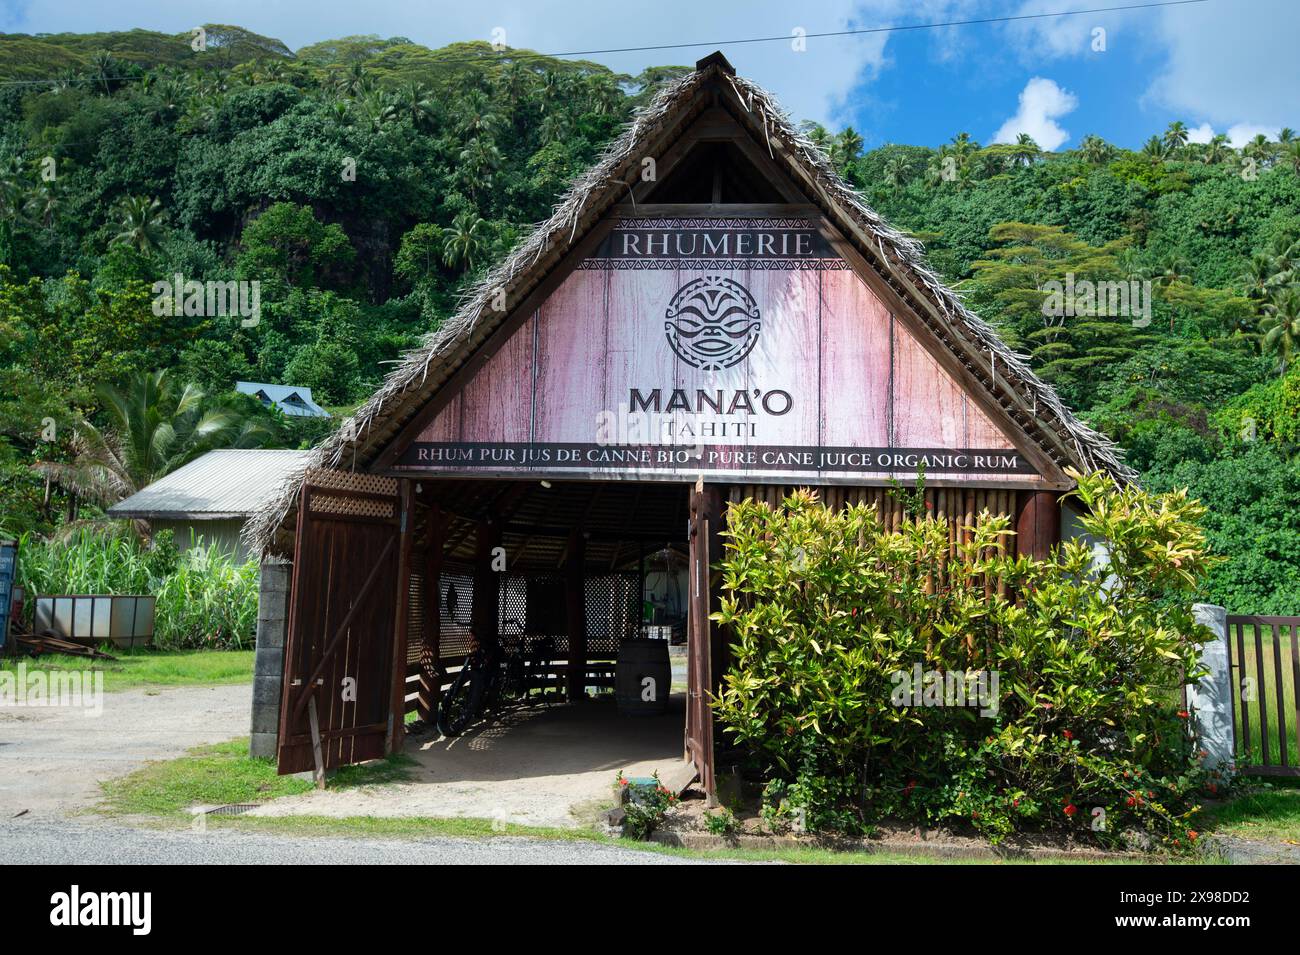 A Rhum bar is a tourist attraction on the island of Taha'a, French Polynesia Stock Photo